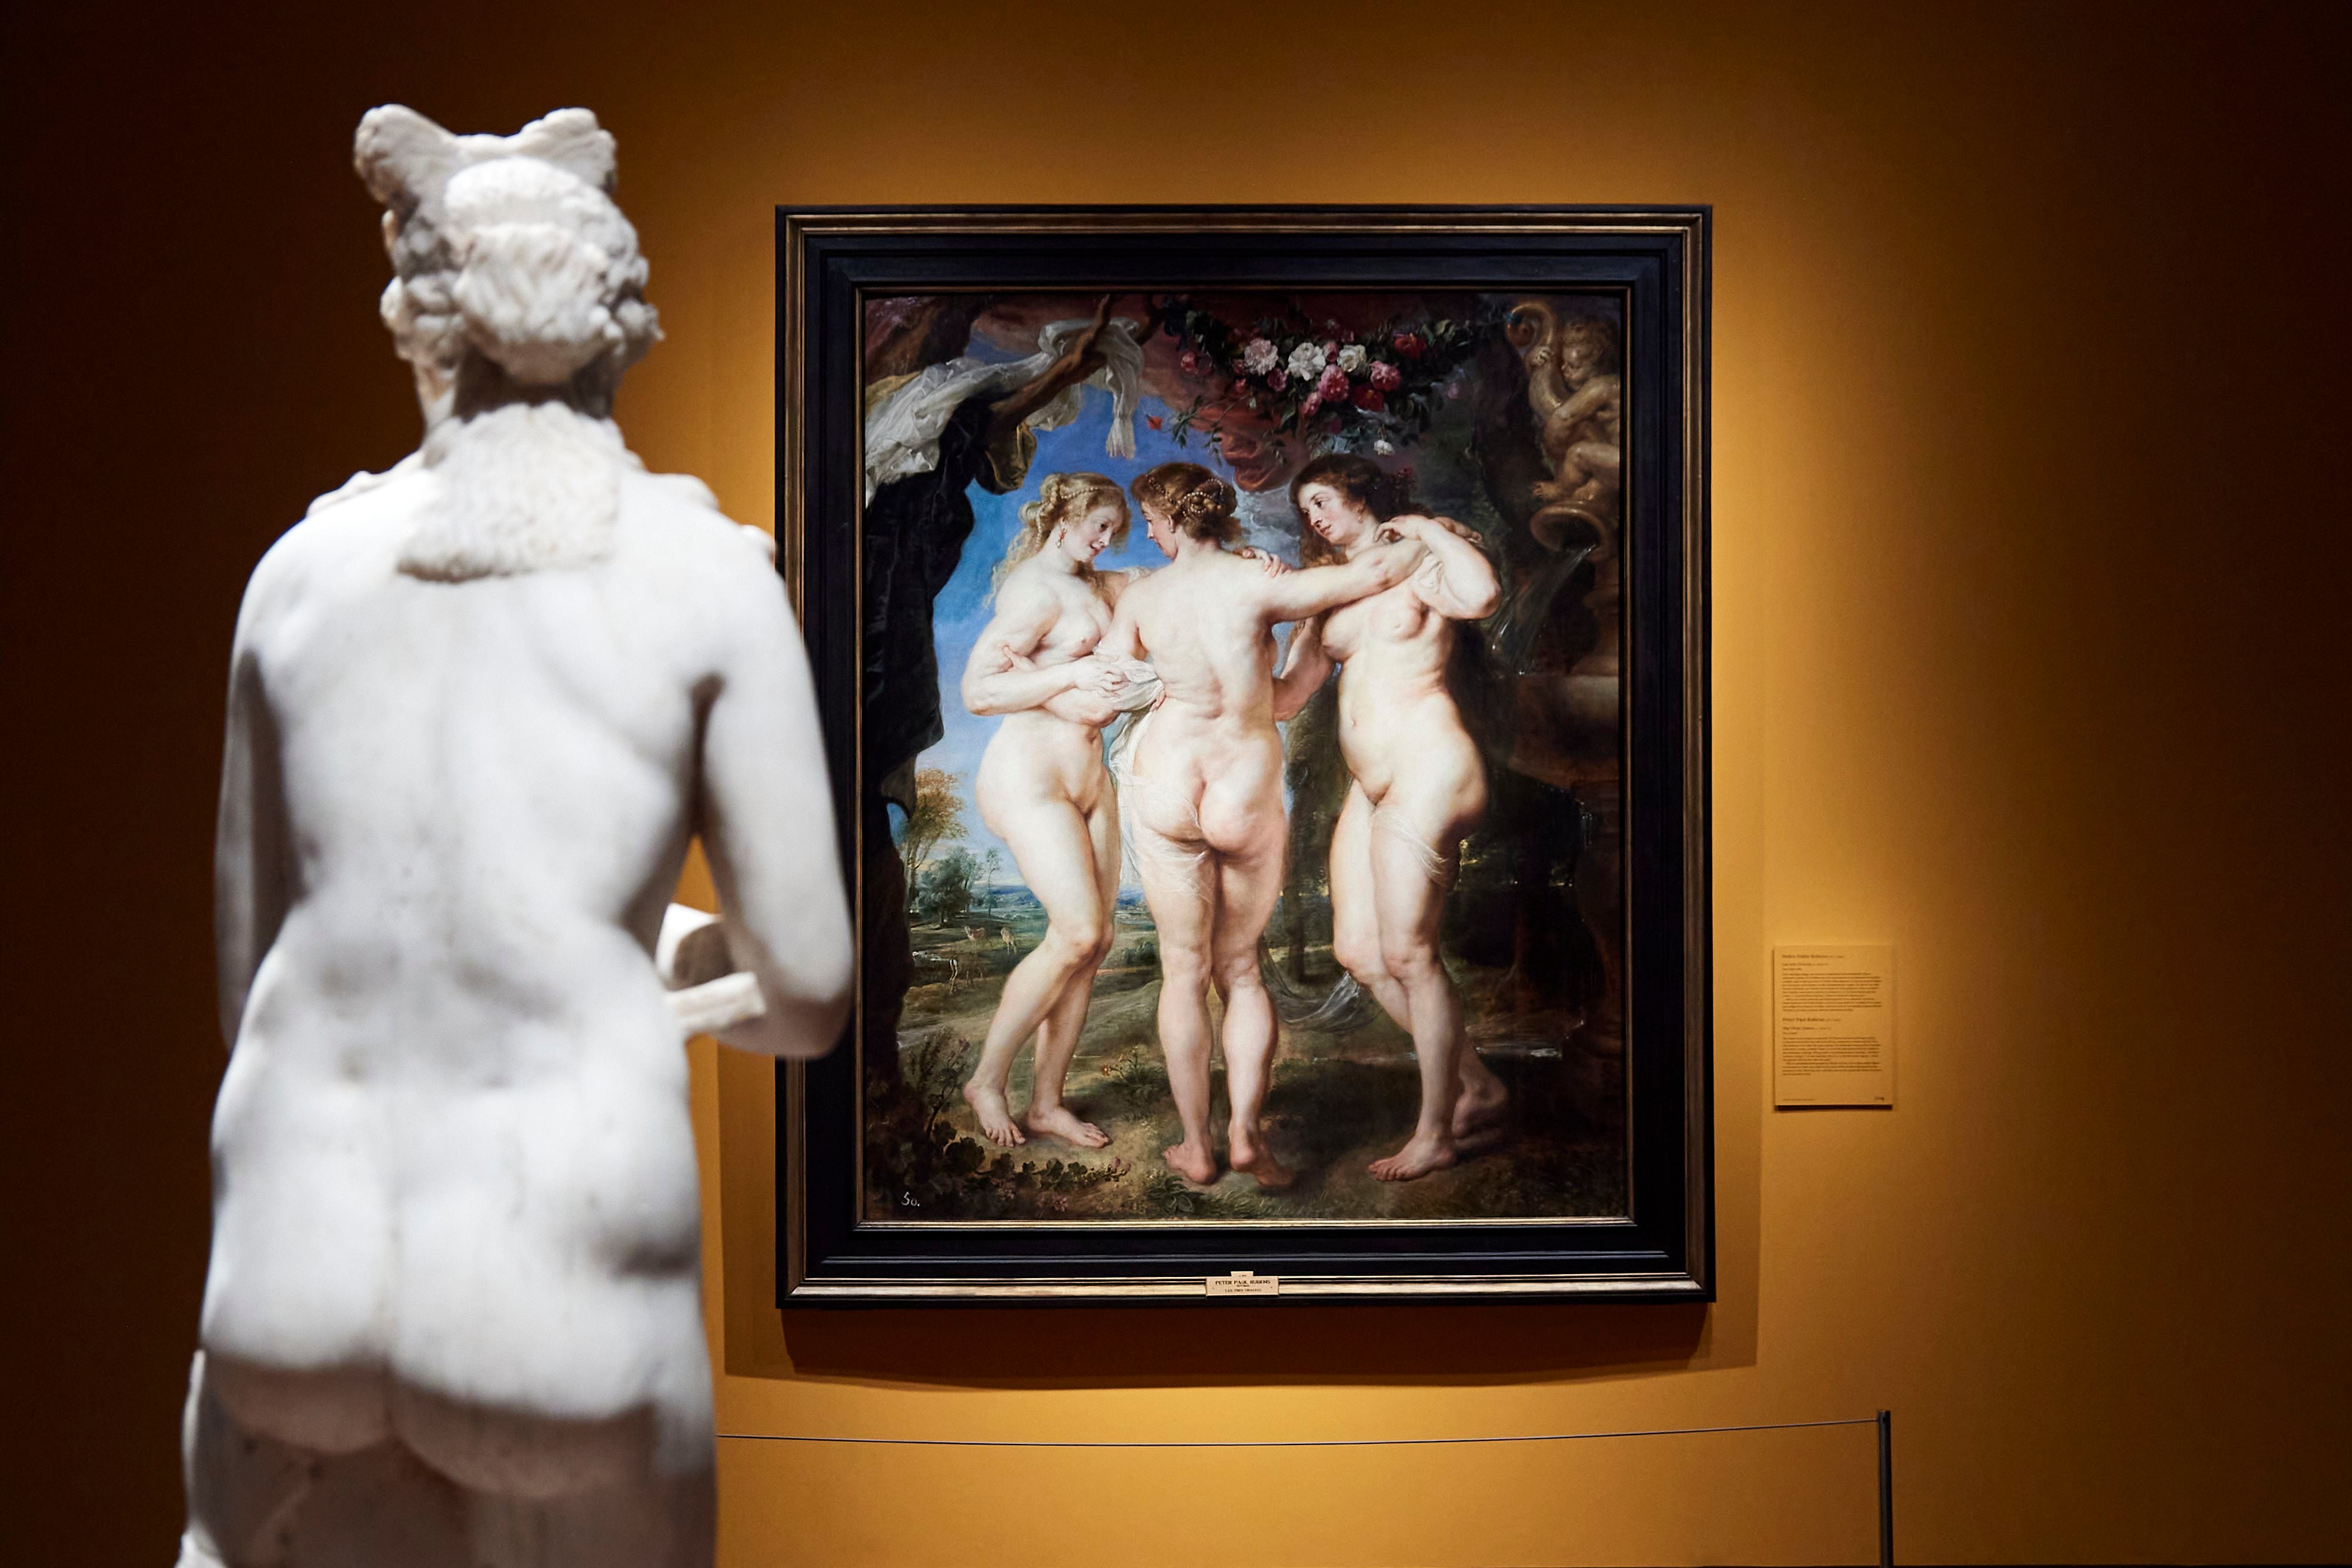 ‘The Three Graces’ by Rubens.